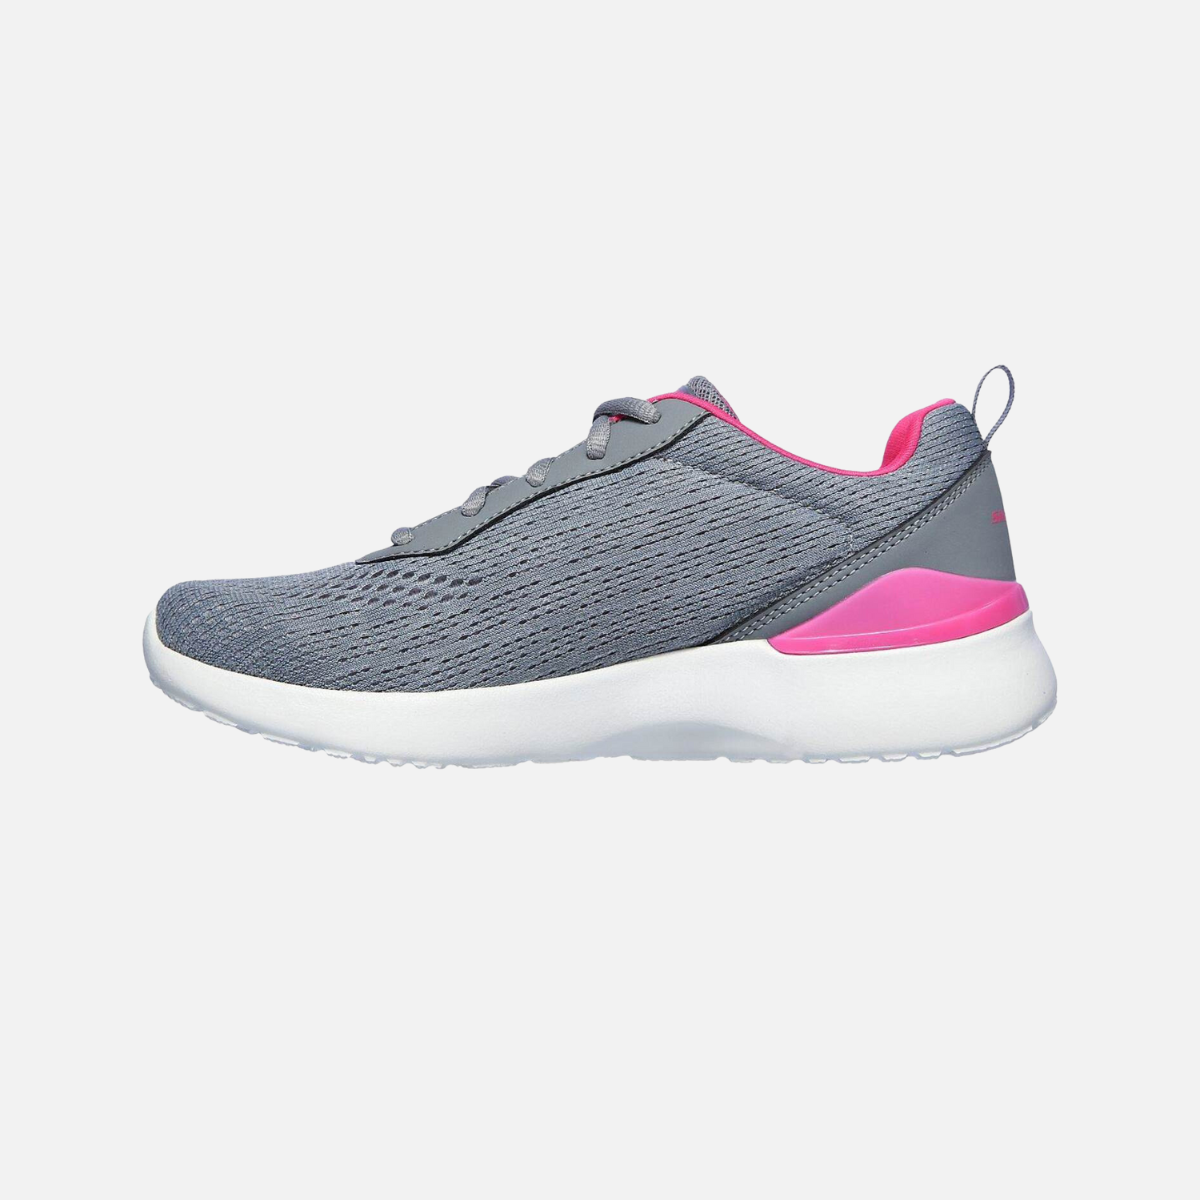 Skechers SKECH-AIR DYNAMIGHT-TOP PRIZE Women's Running Shoes -Grey/Hot Pink